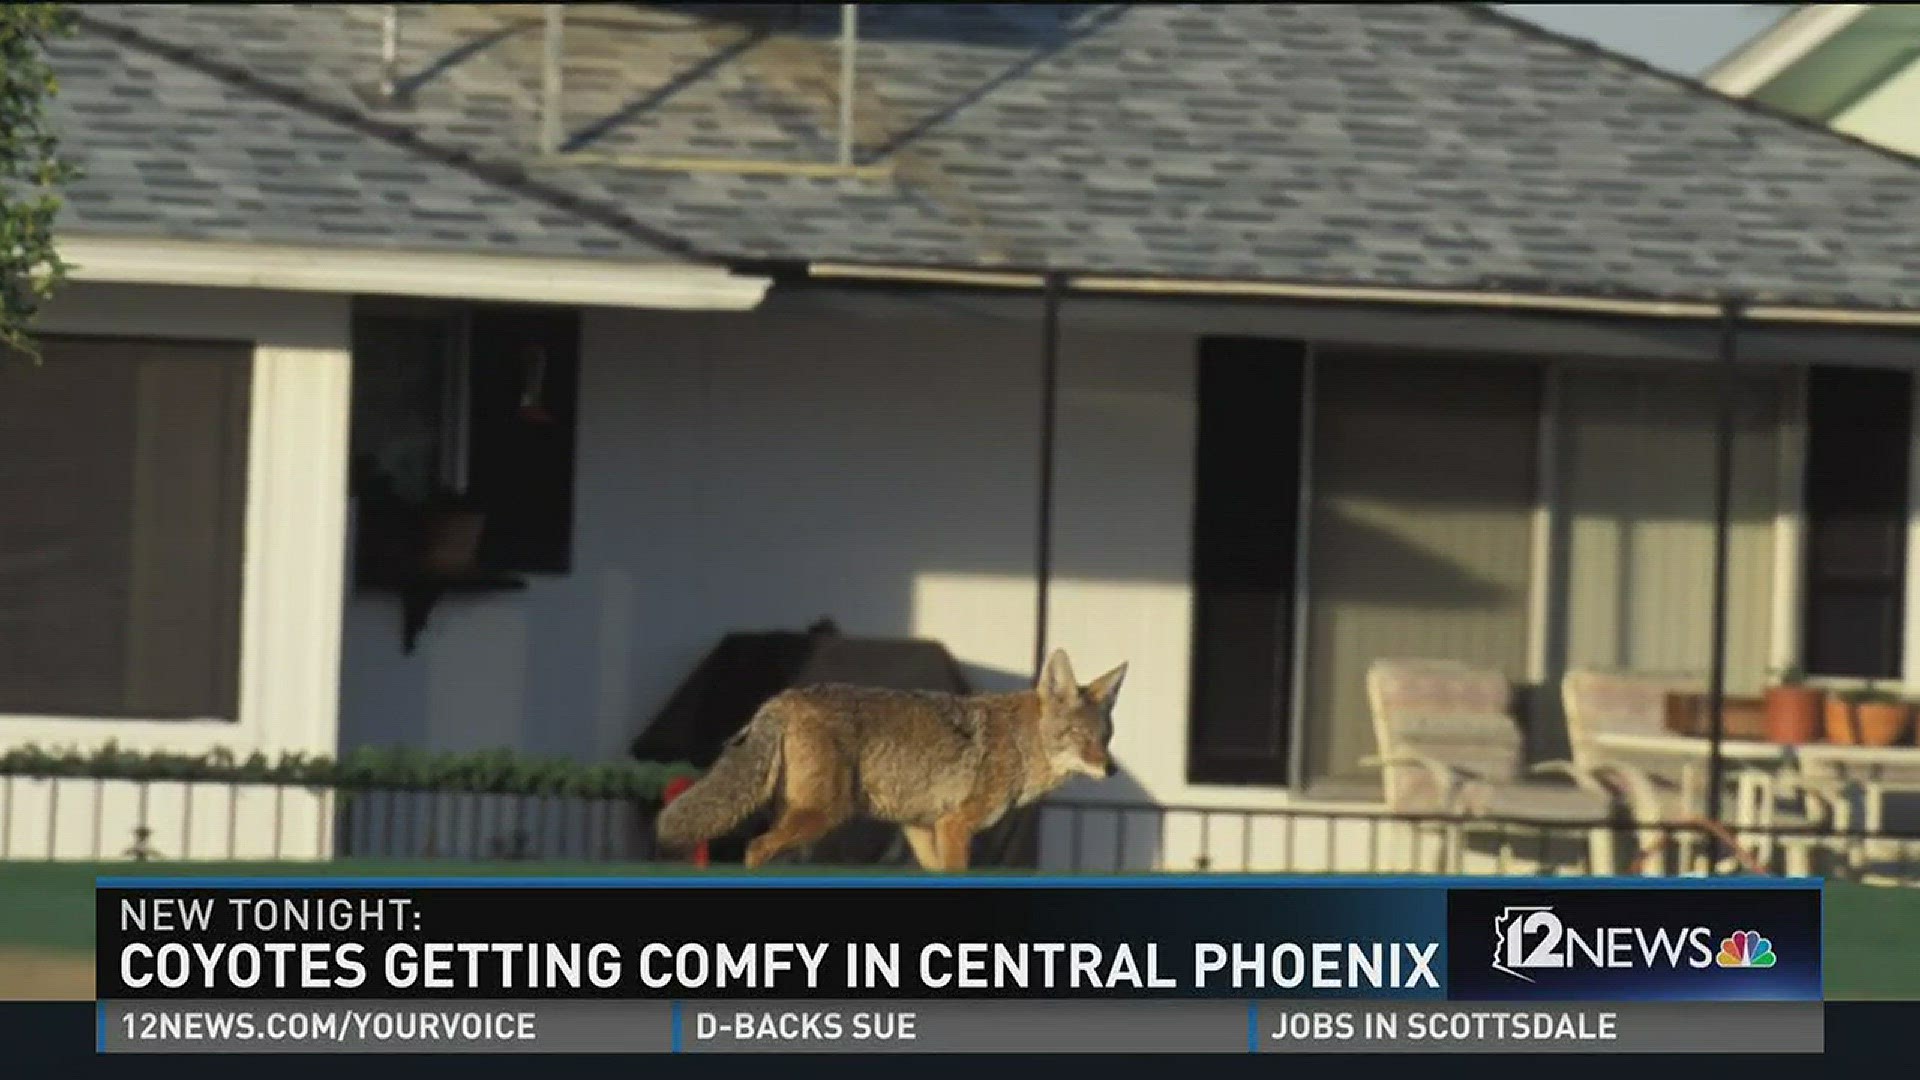 Coyotes getting comfy in central Phoenix.